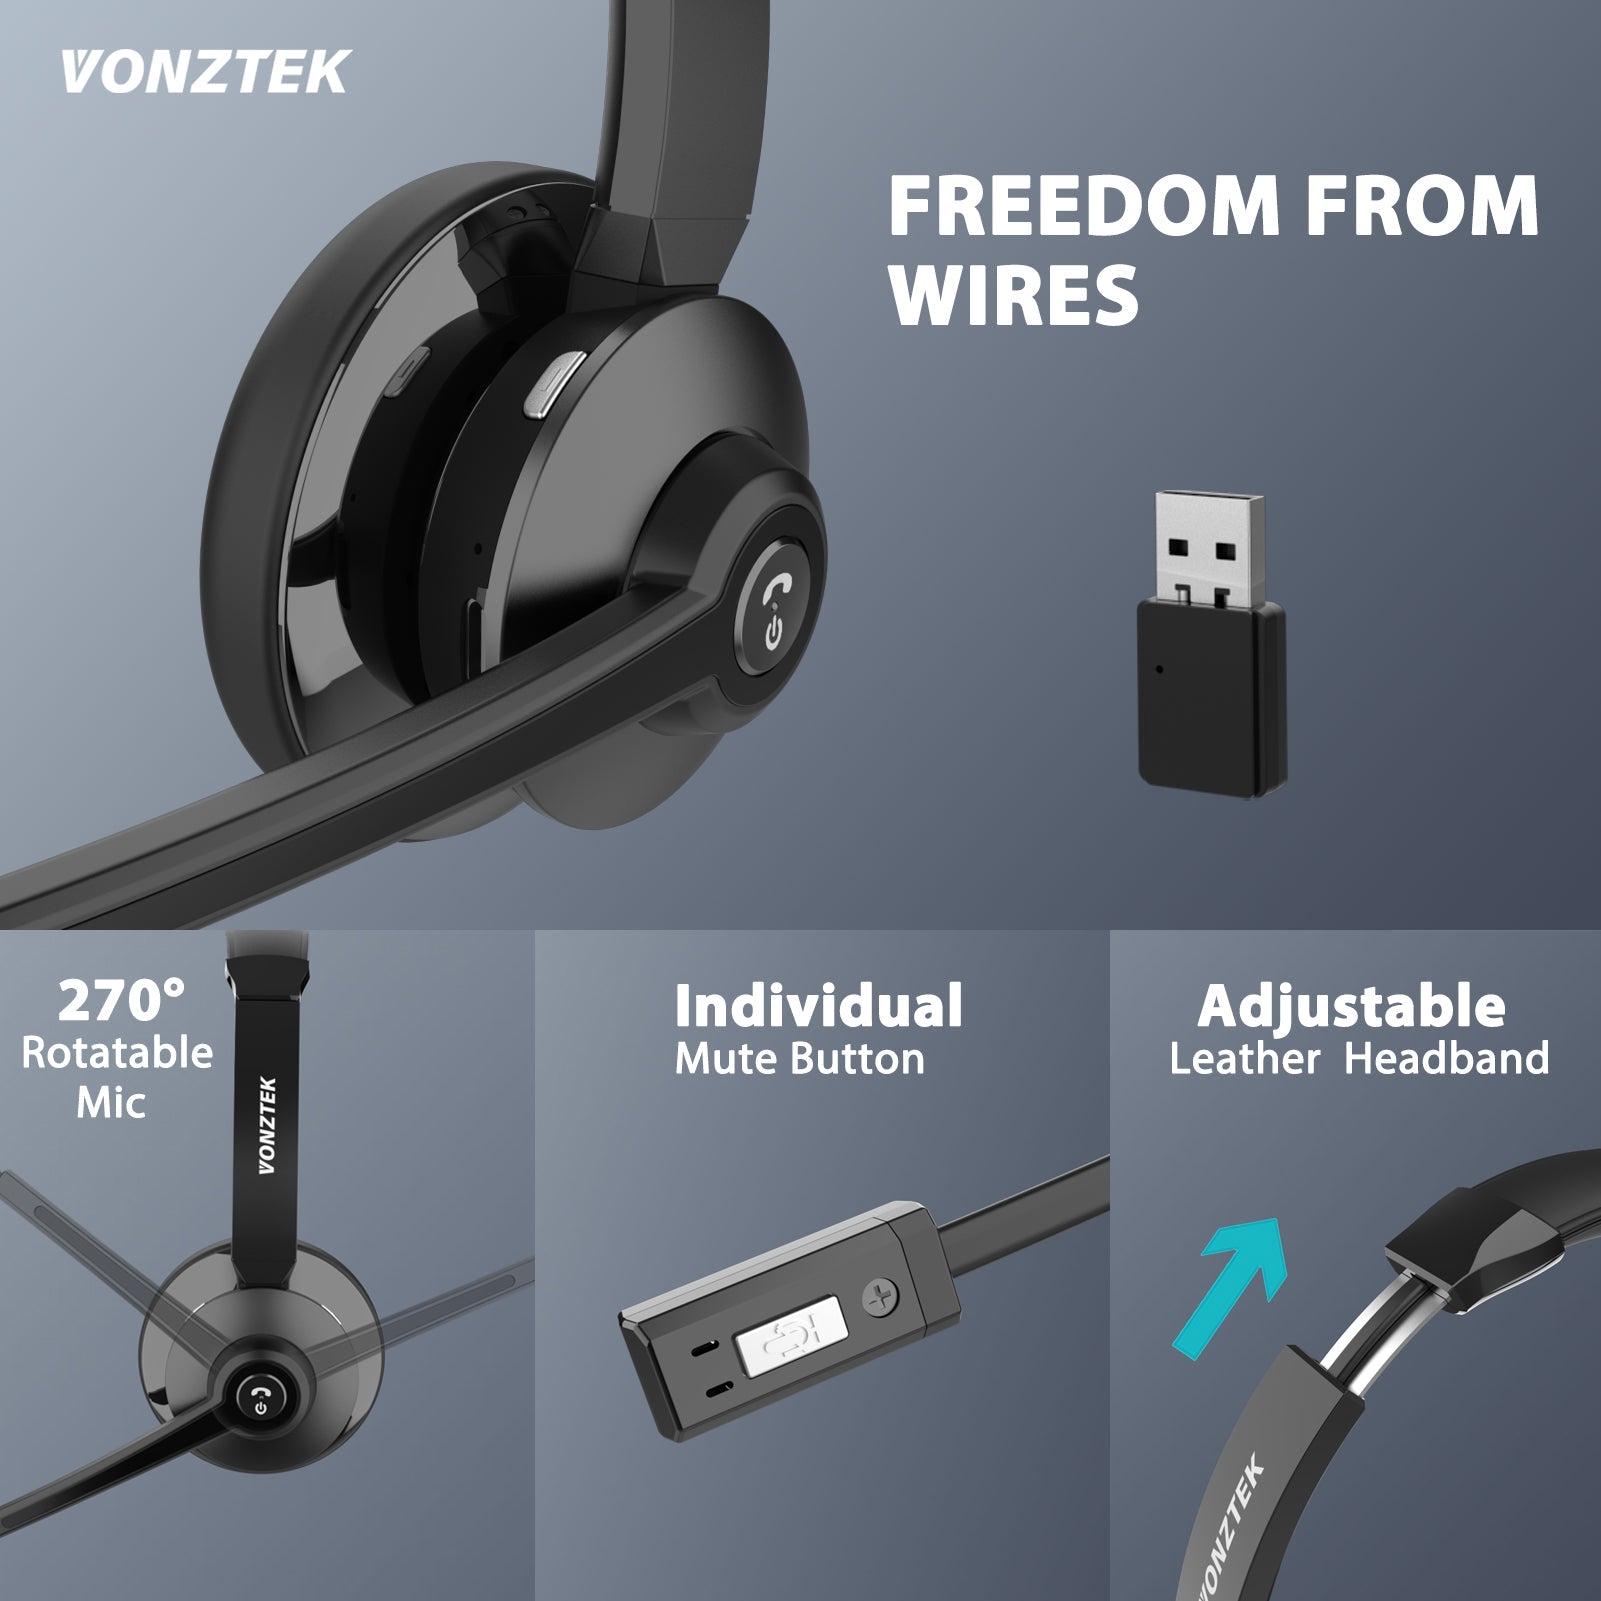 Freedom from wires,270 rotatable mic,individual mute button,Adjustable leather headband